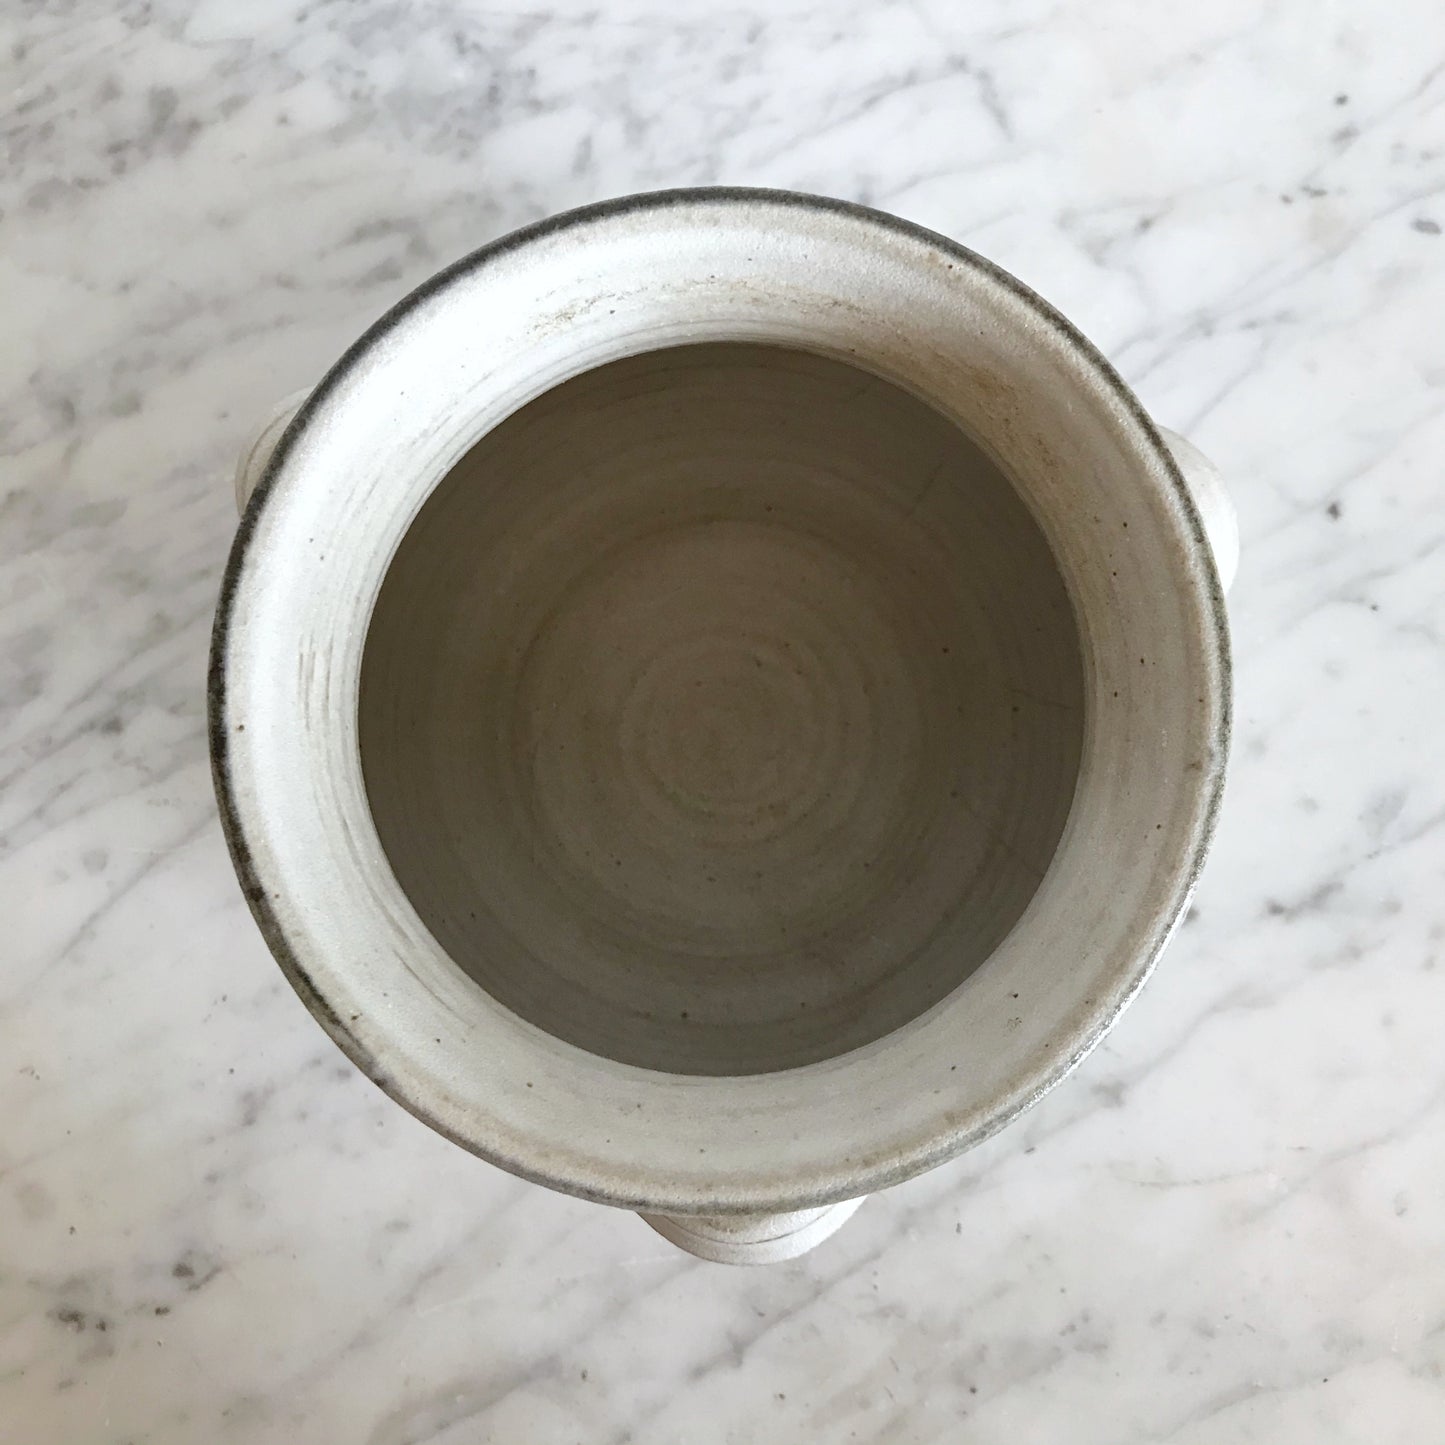 Vintage Pottery Vessel with Waves